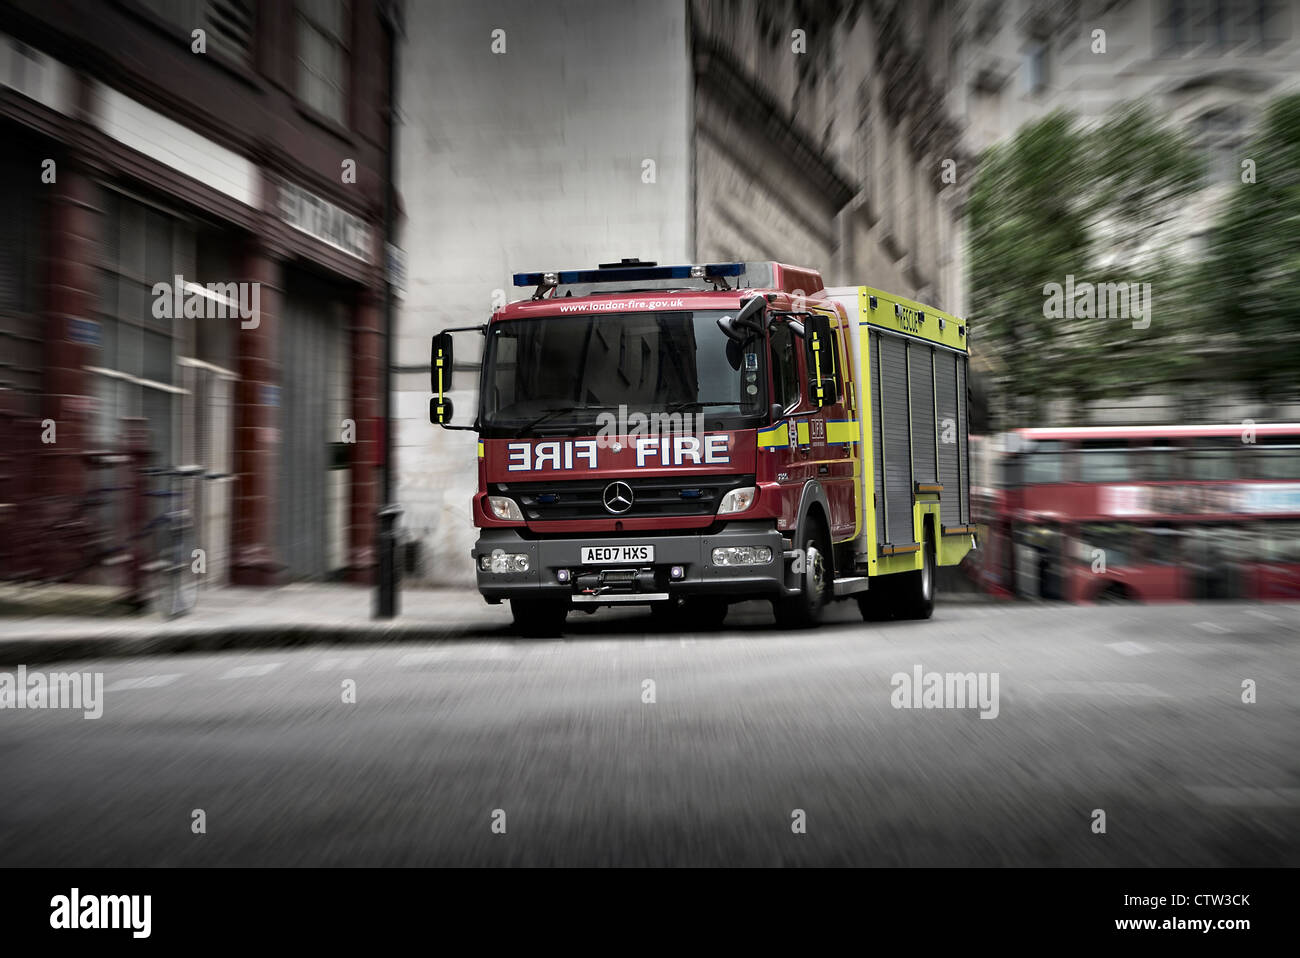 London Fire Brigade Fire engine in central London Stock Photo